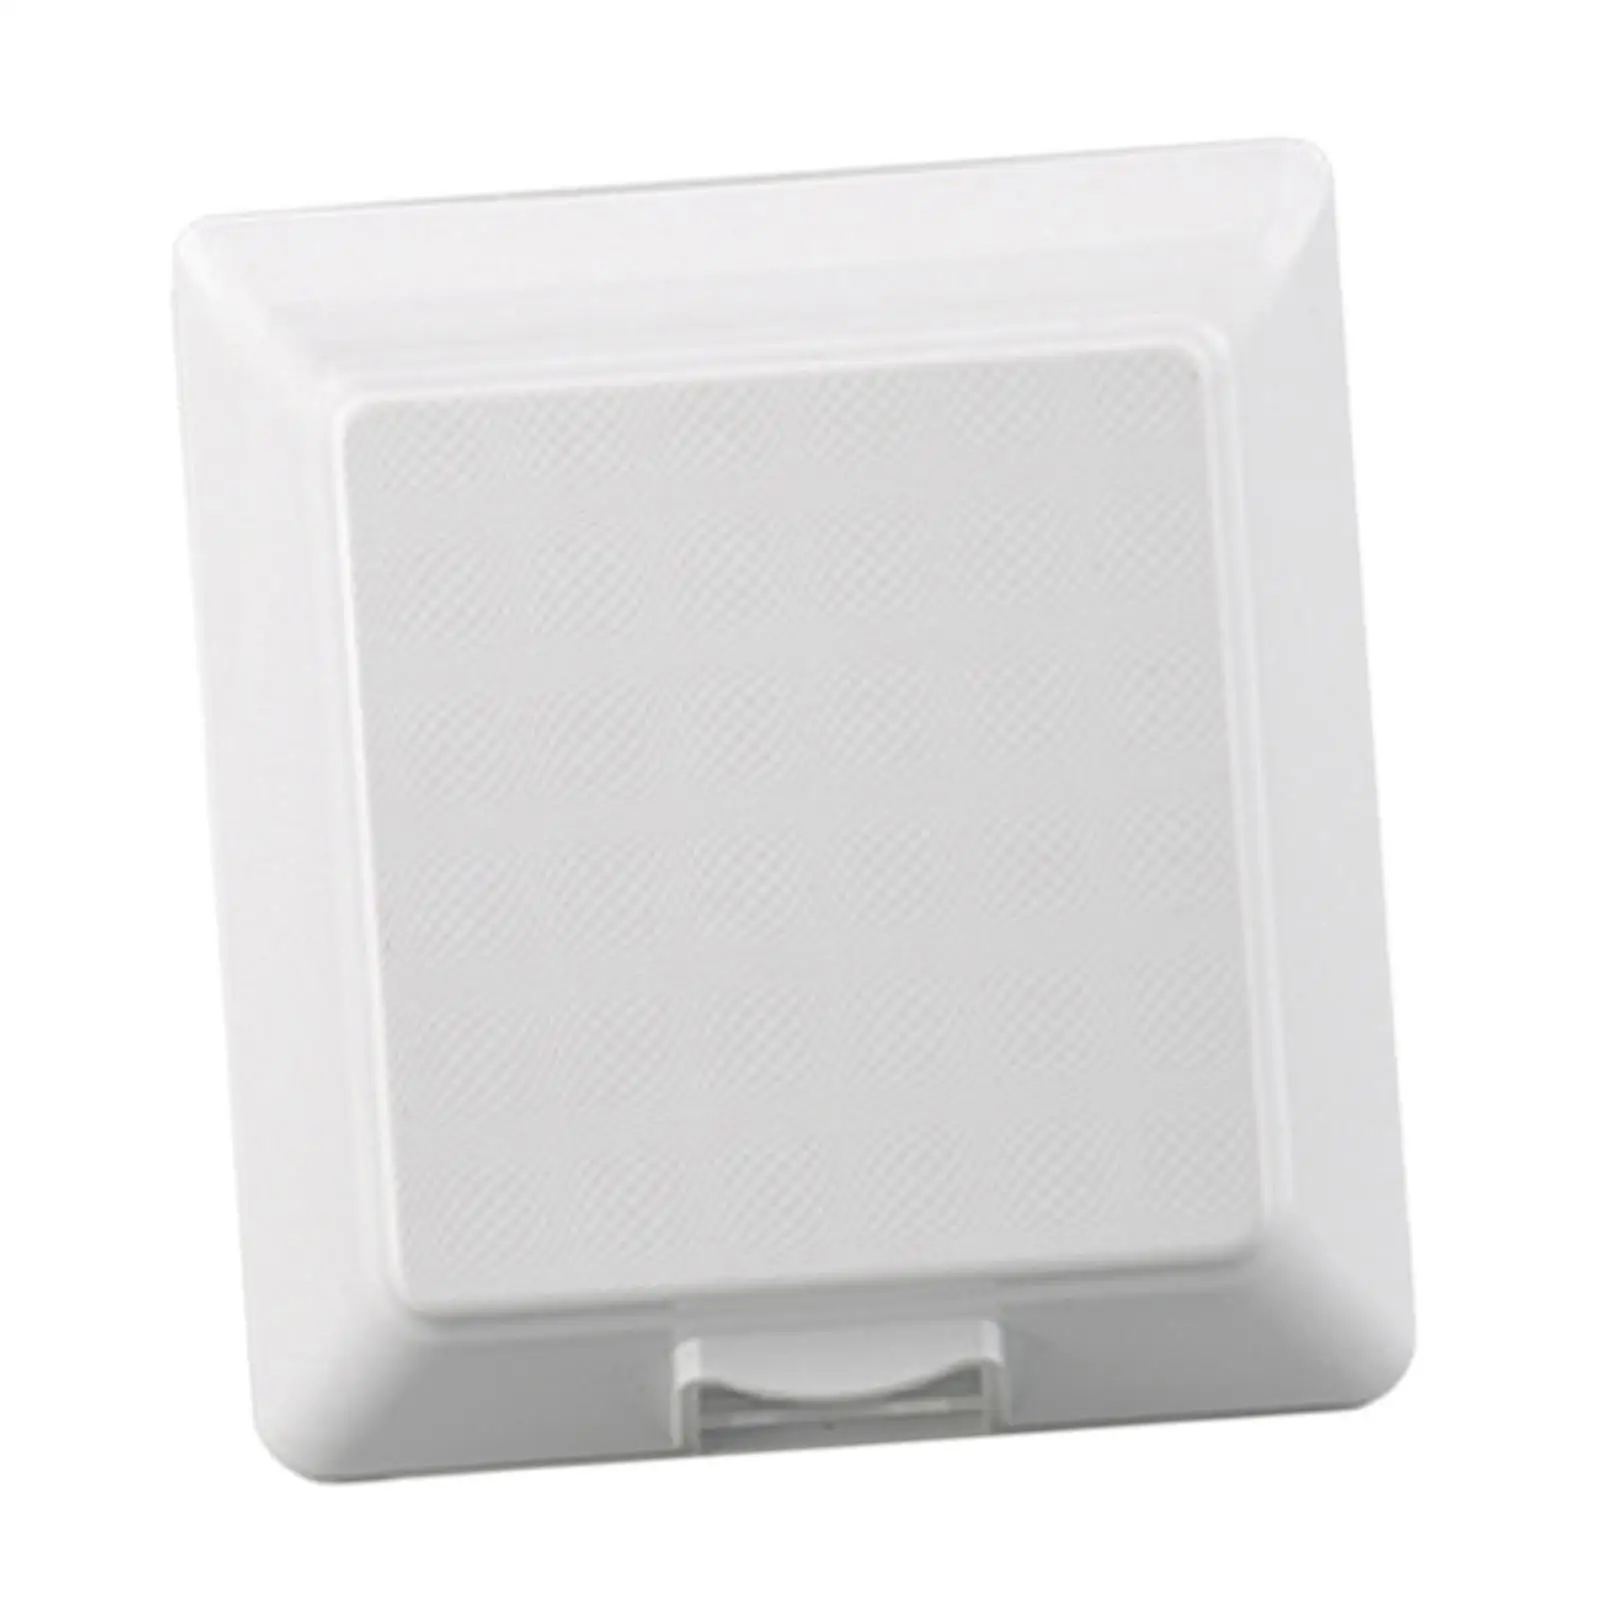 Switch Cover Waterproof Electrical Outlet Cover for Outdoor Pool Restaurant